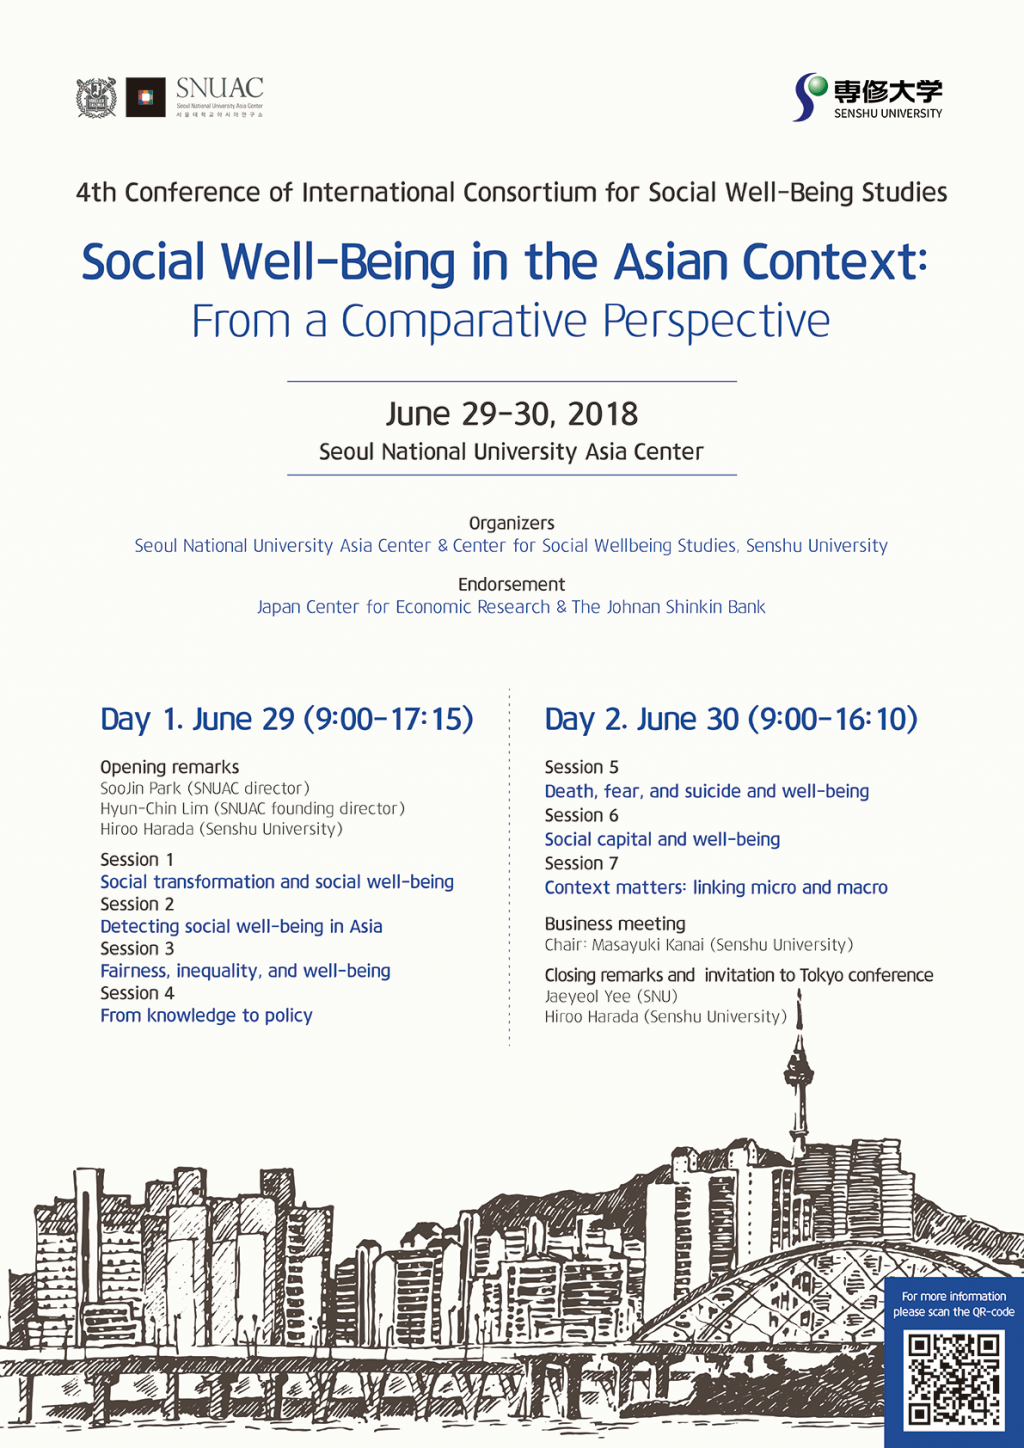 The 4th Conference of International Consortium for Social Well-Being Studies “Social Well-Being in the Asian Context: From a Comparative Perspective”